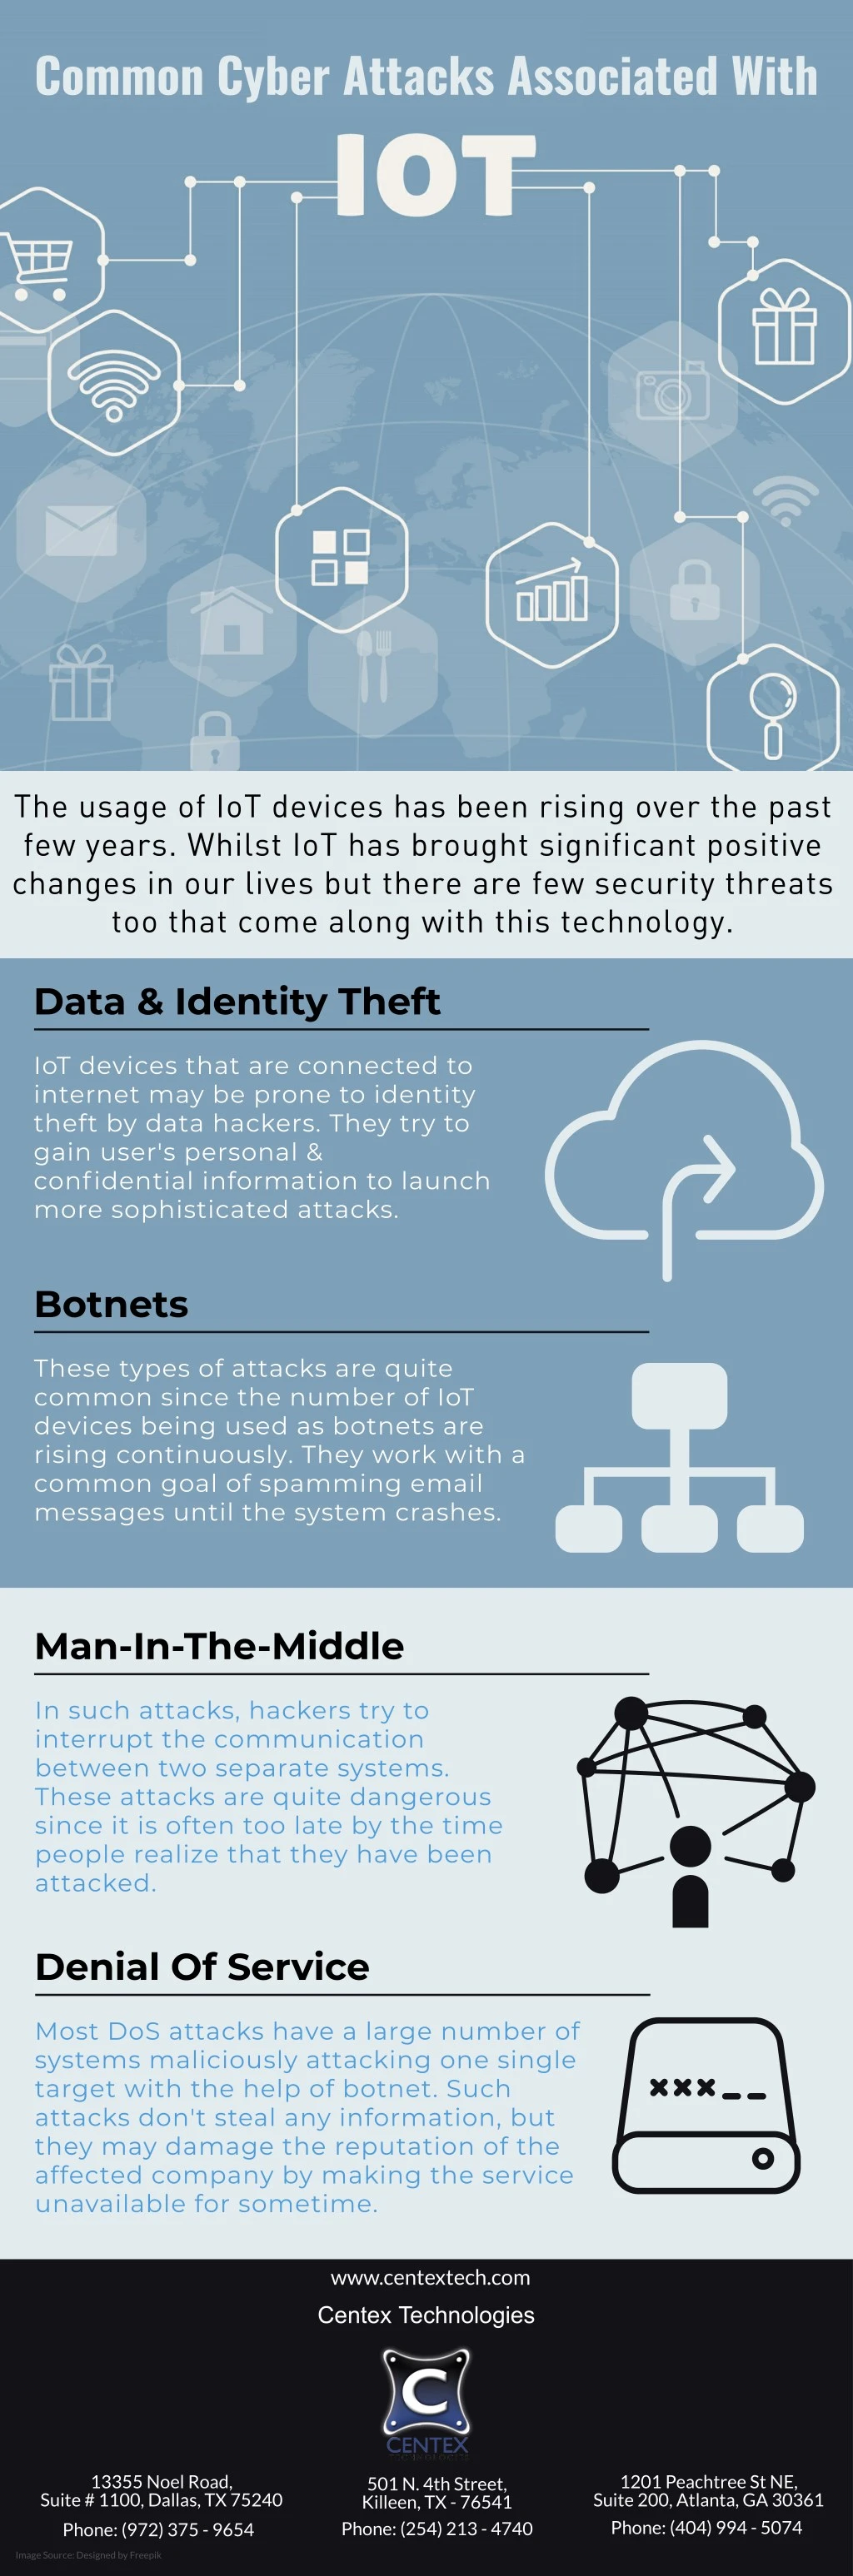 common cyber attacks associated with